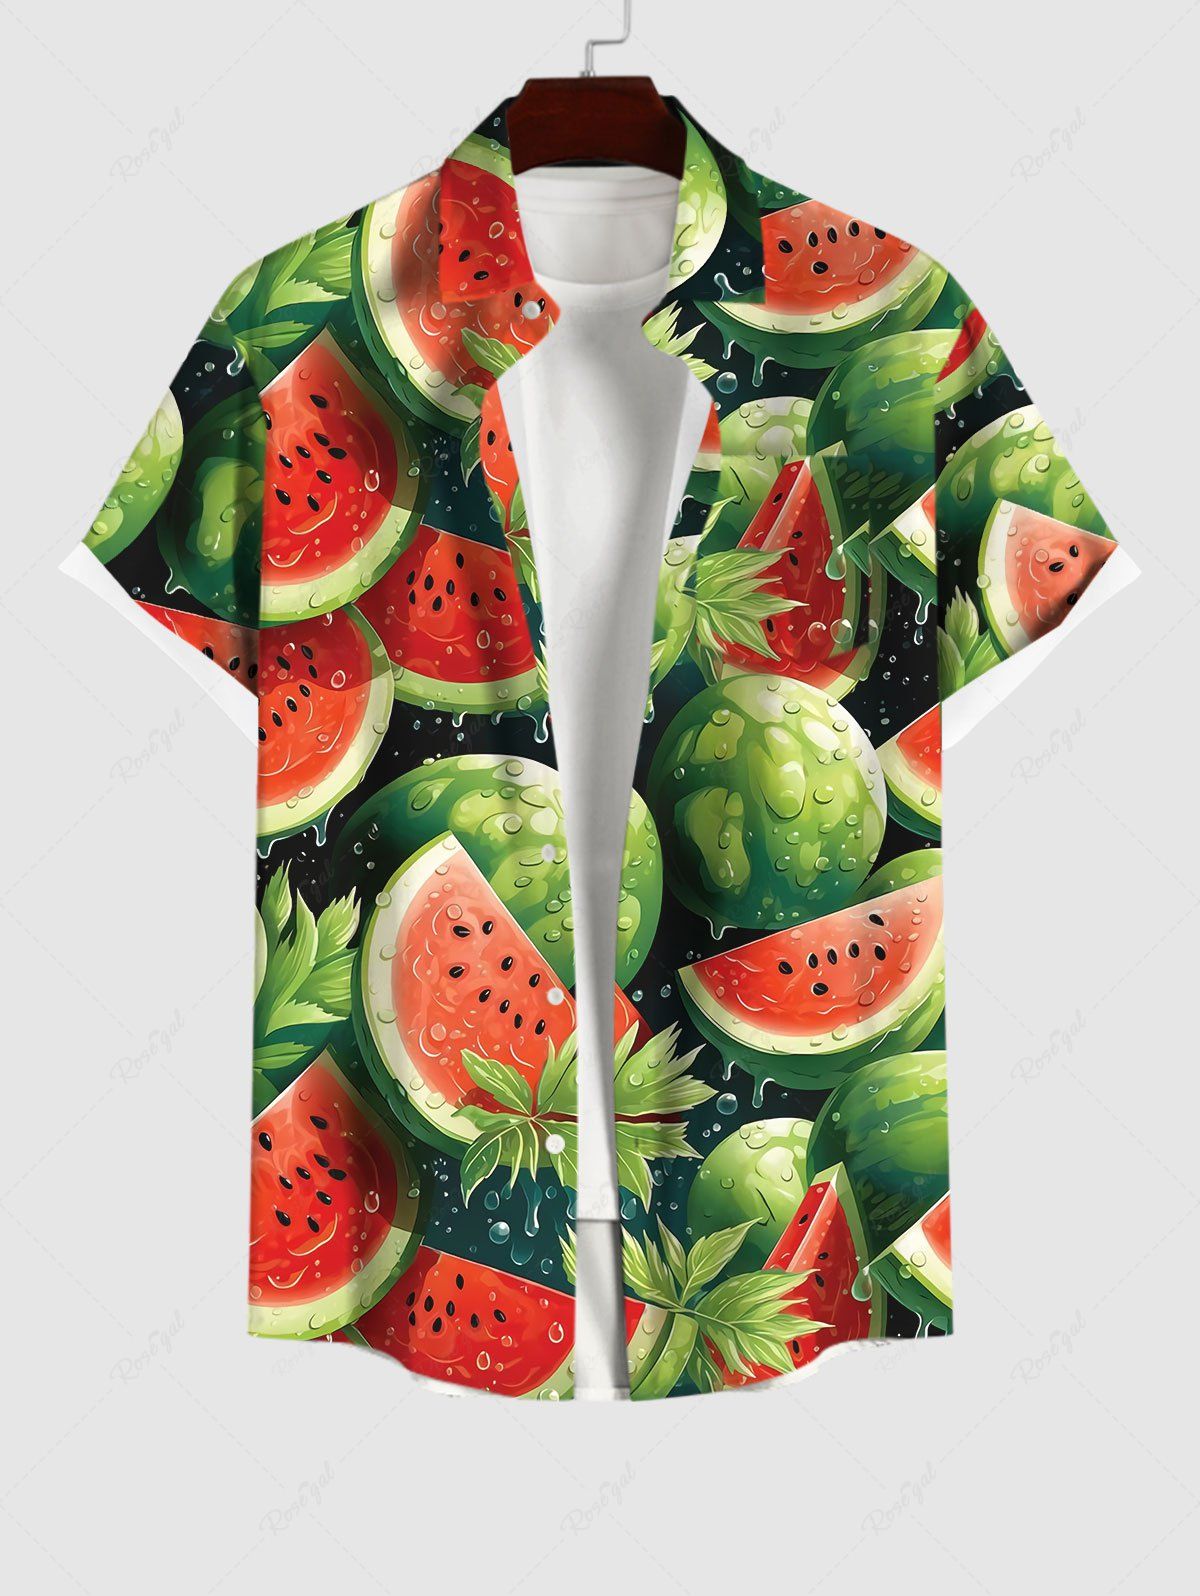 New Hawaii Plus Size Watermelon Leaf  Print Buttons Pocket Shirt For Men  